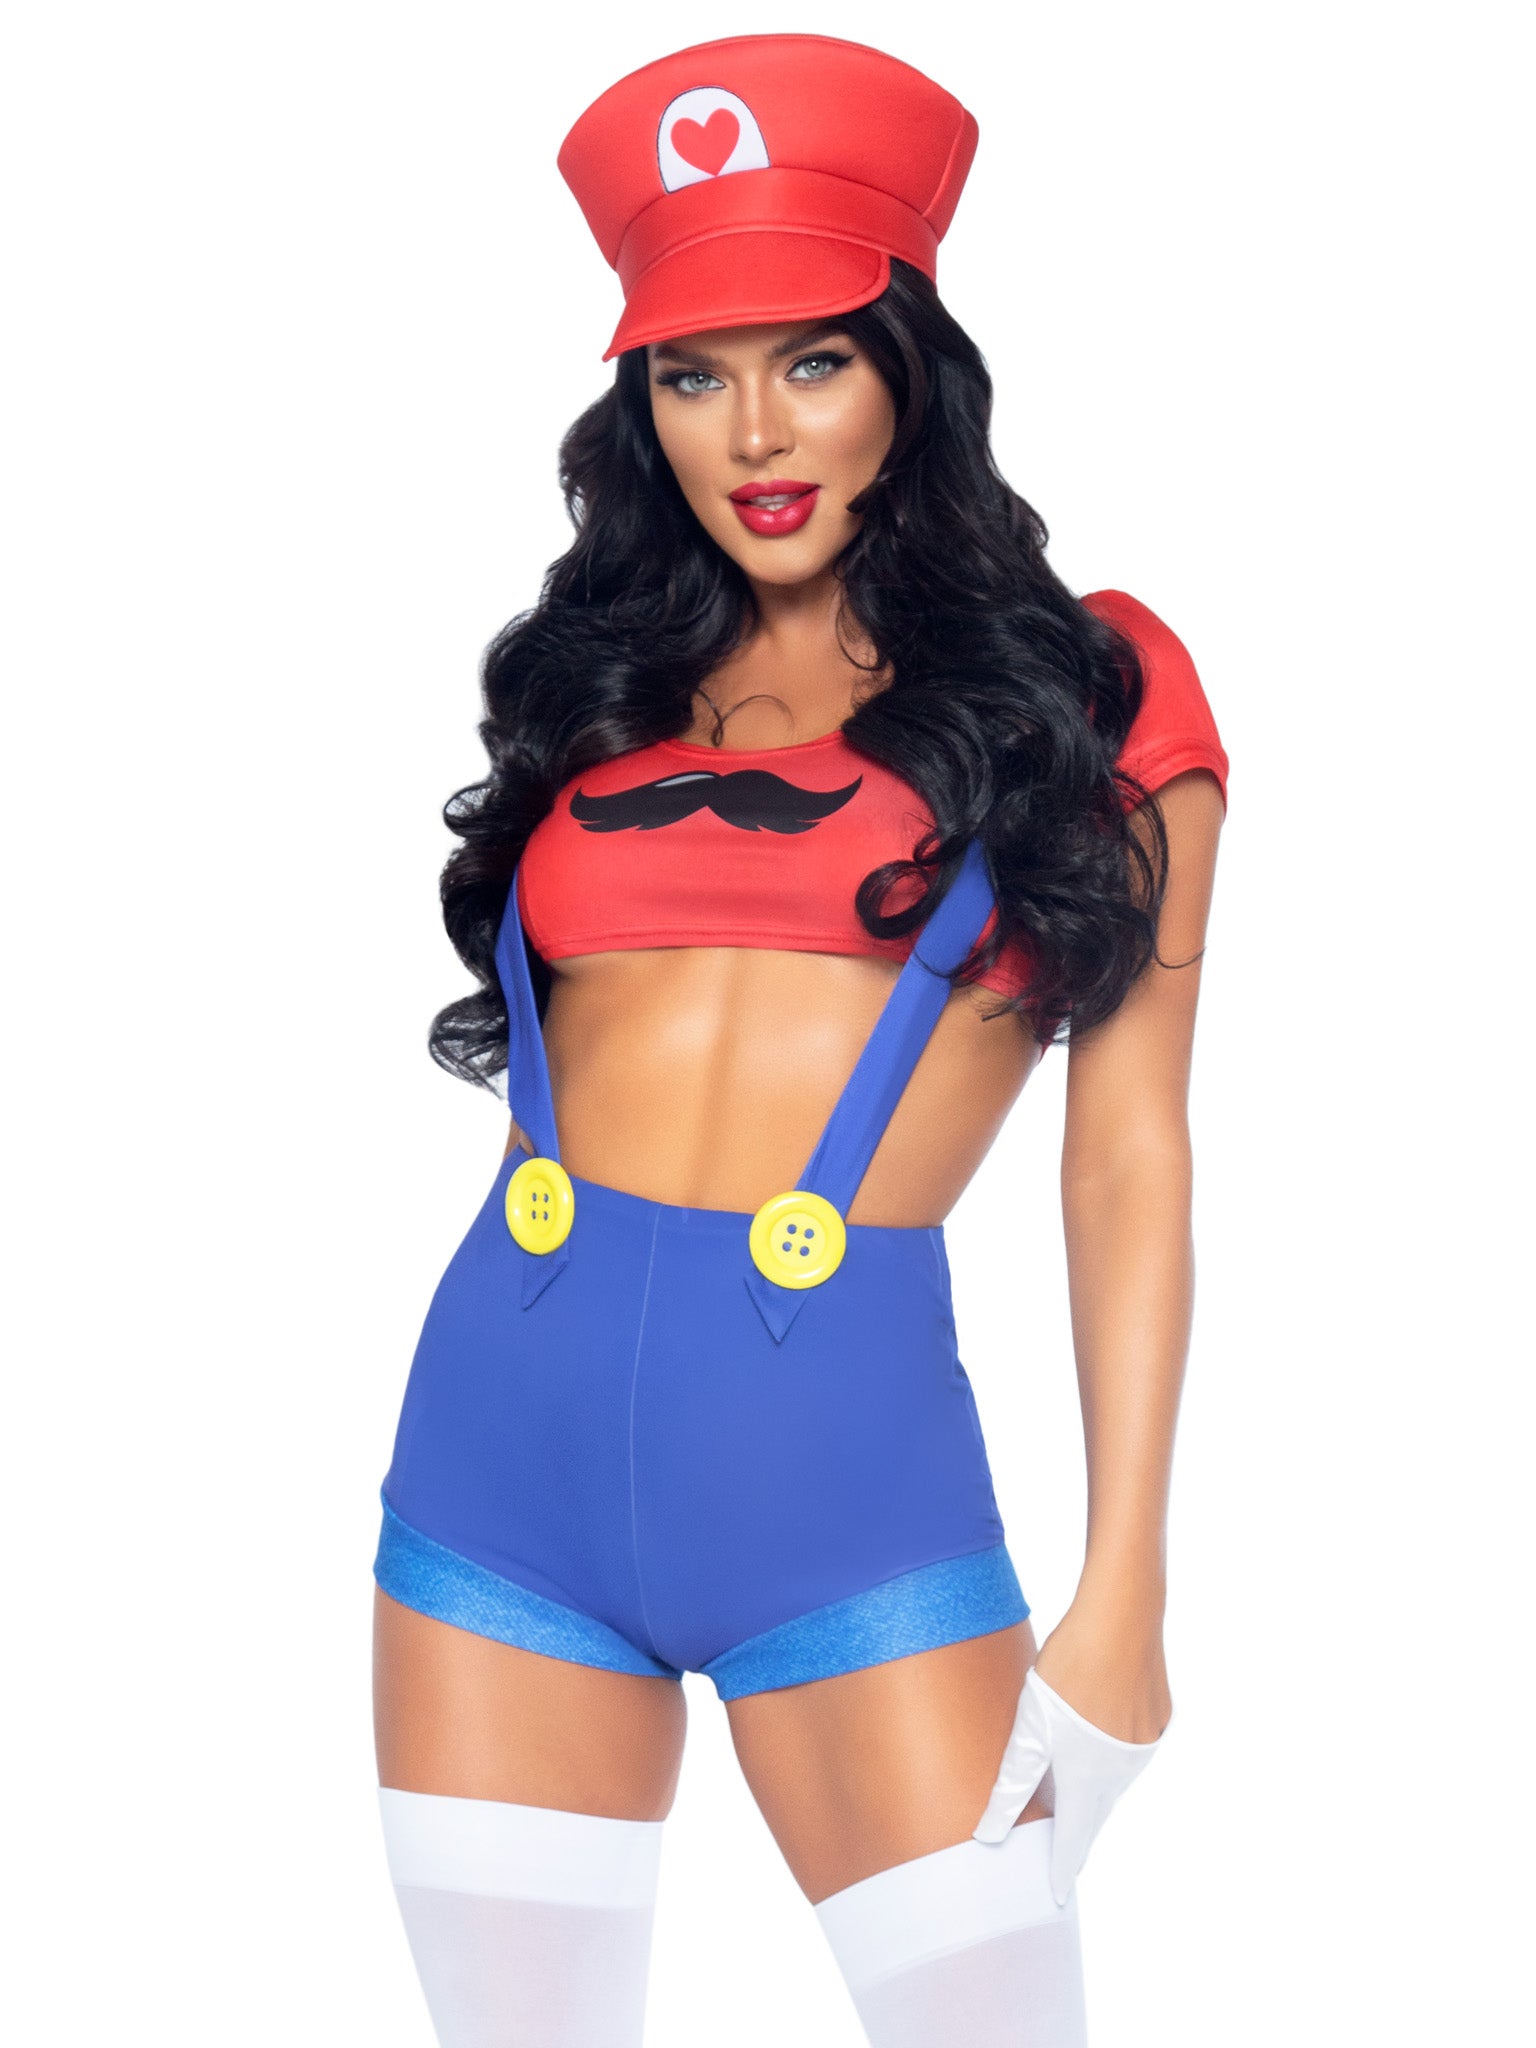 Gamer Babe Sexy Costume, Womens Video Game Costumes Leg Avenue